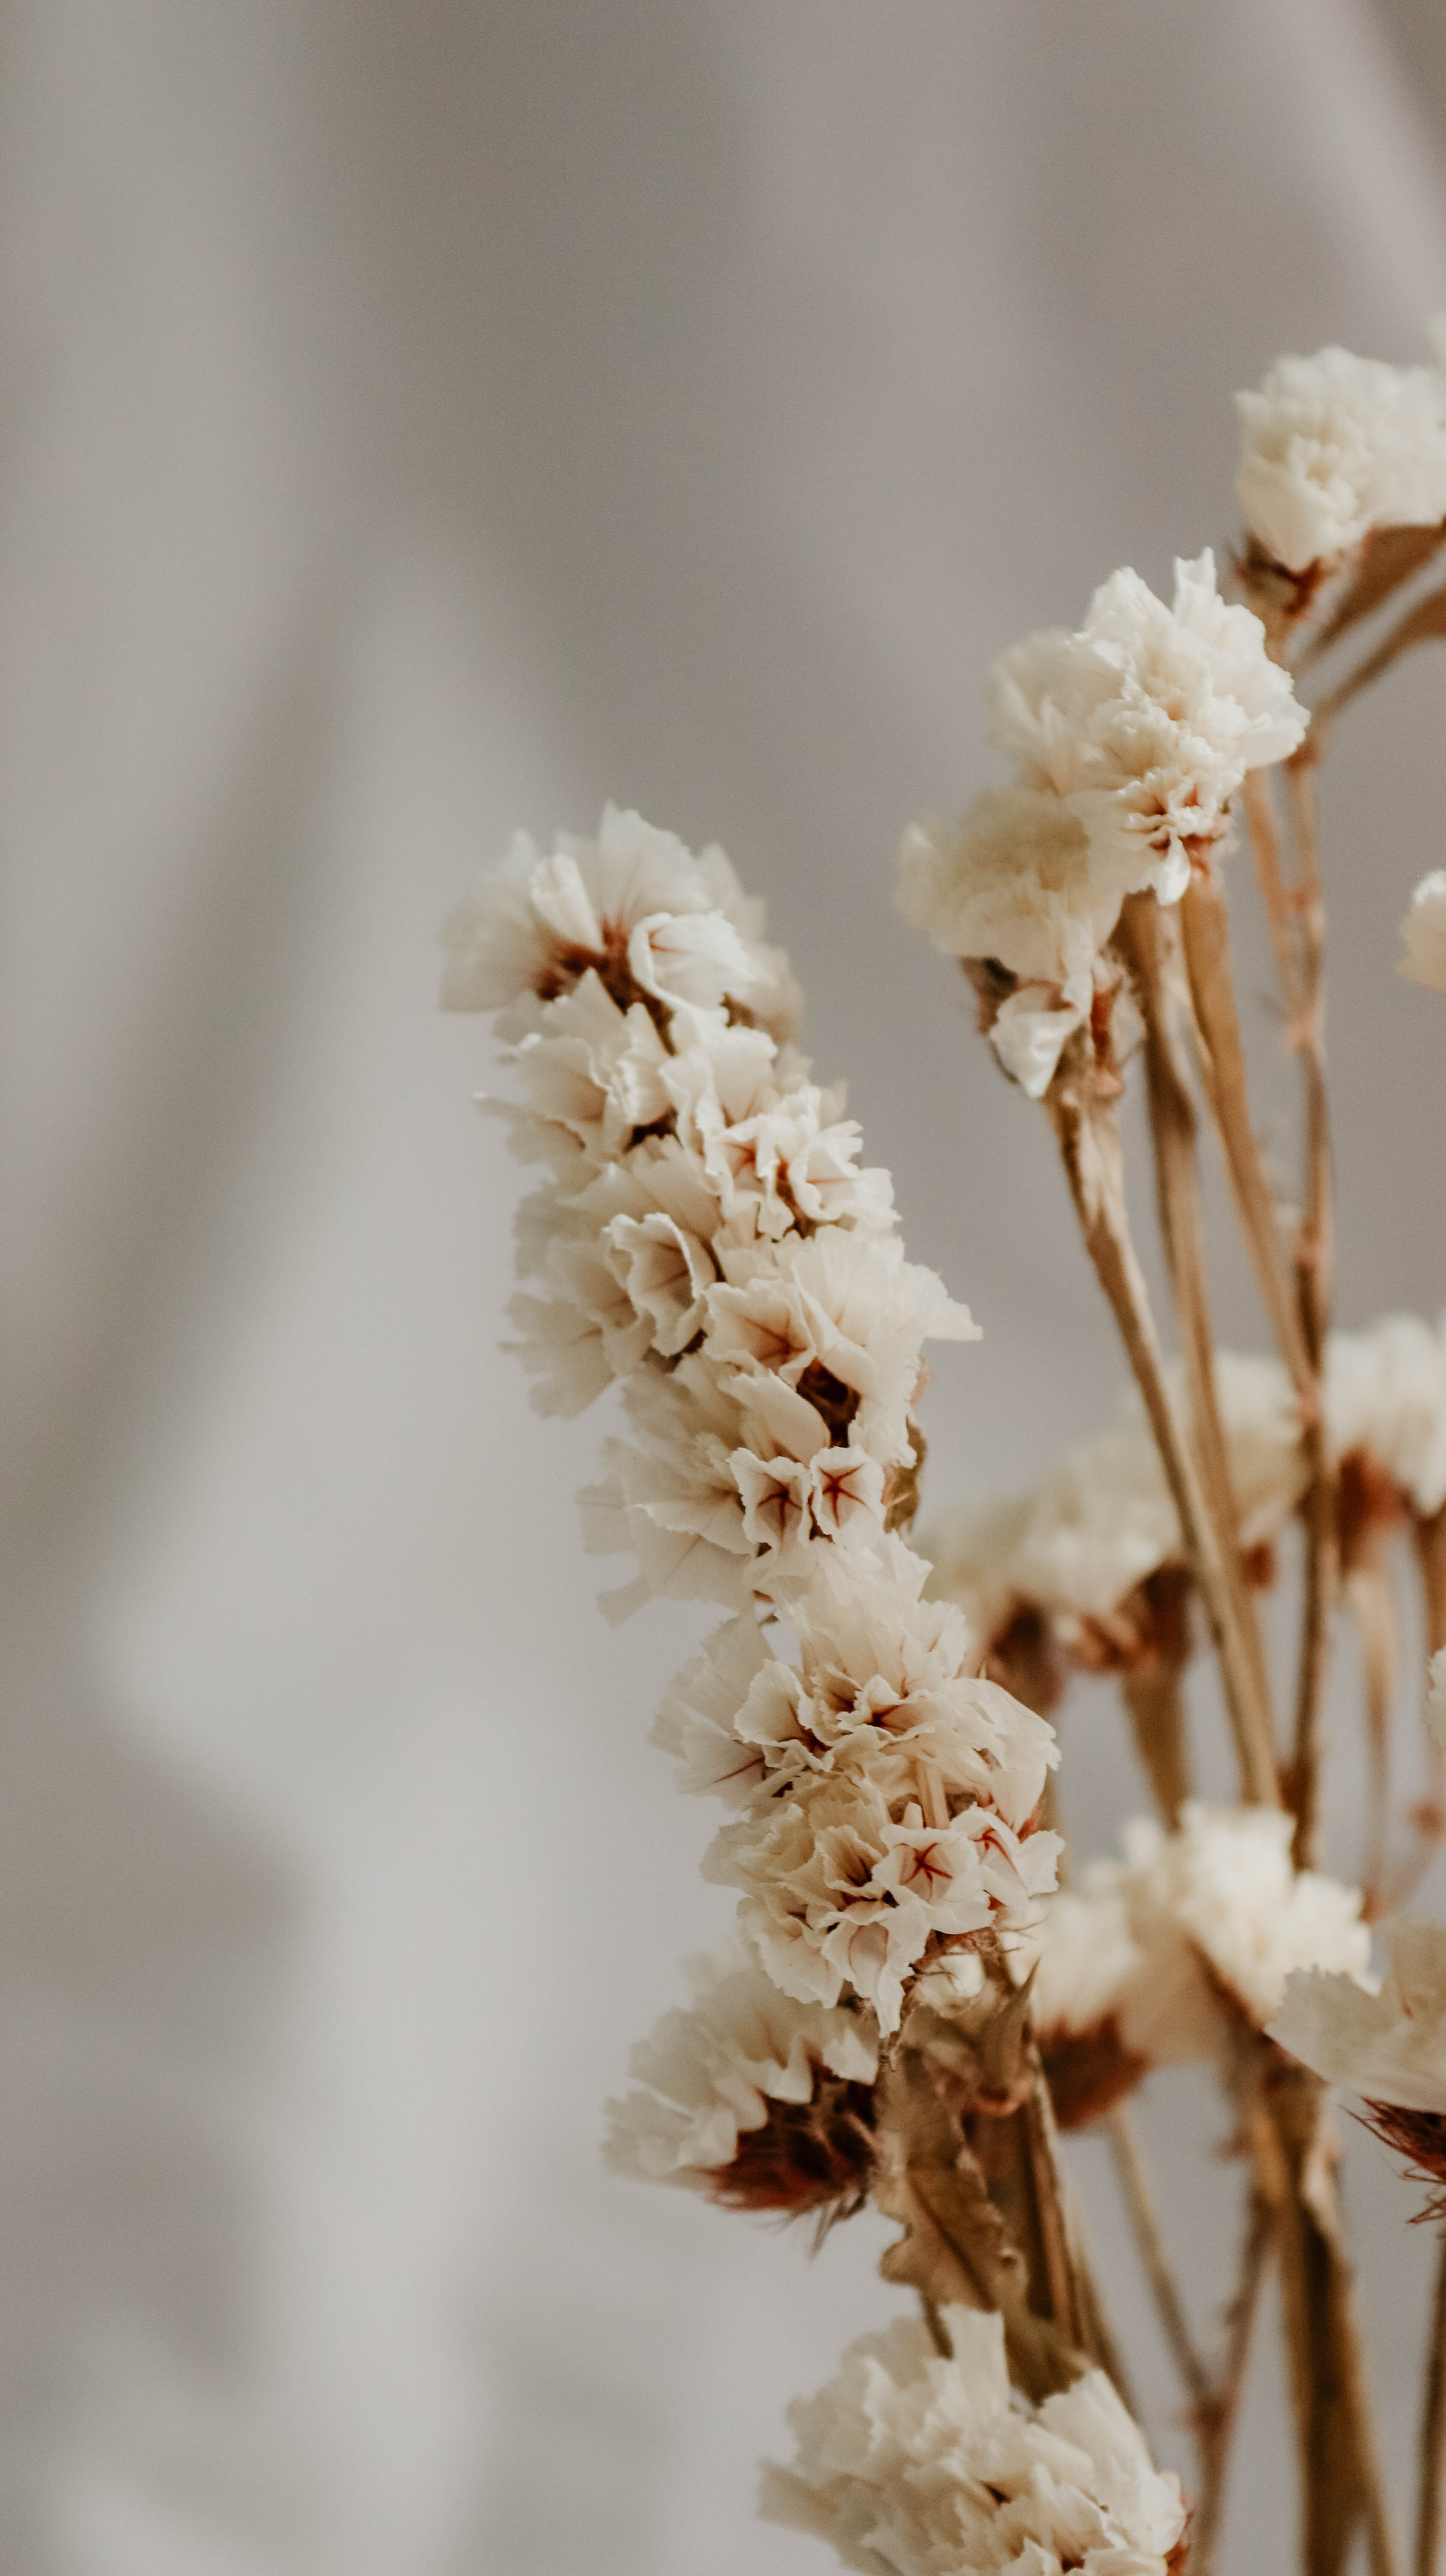 Clusters of Small White Dried Flowers